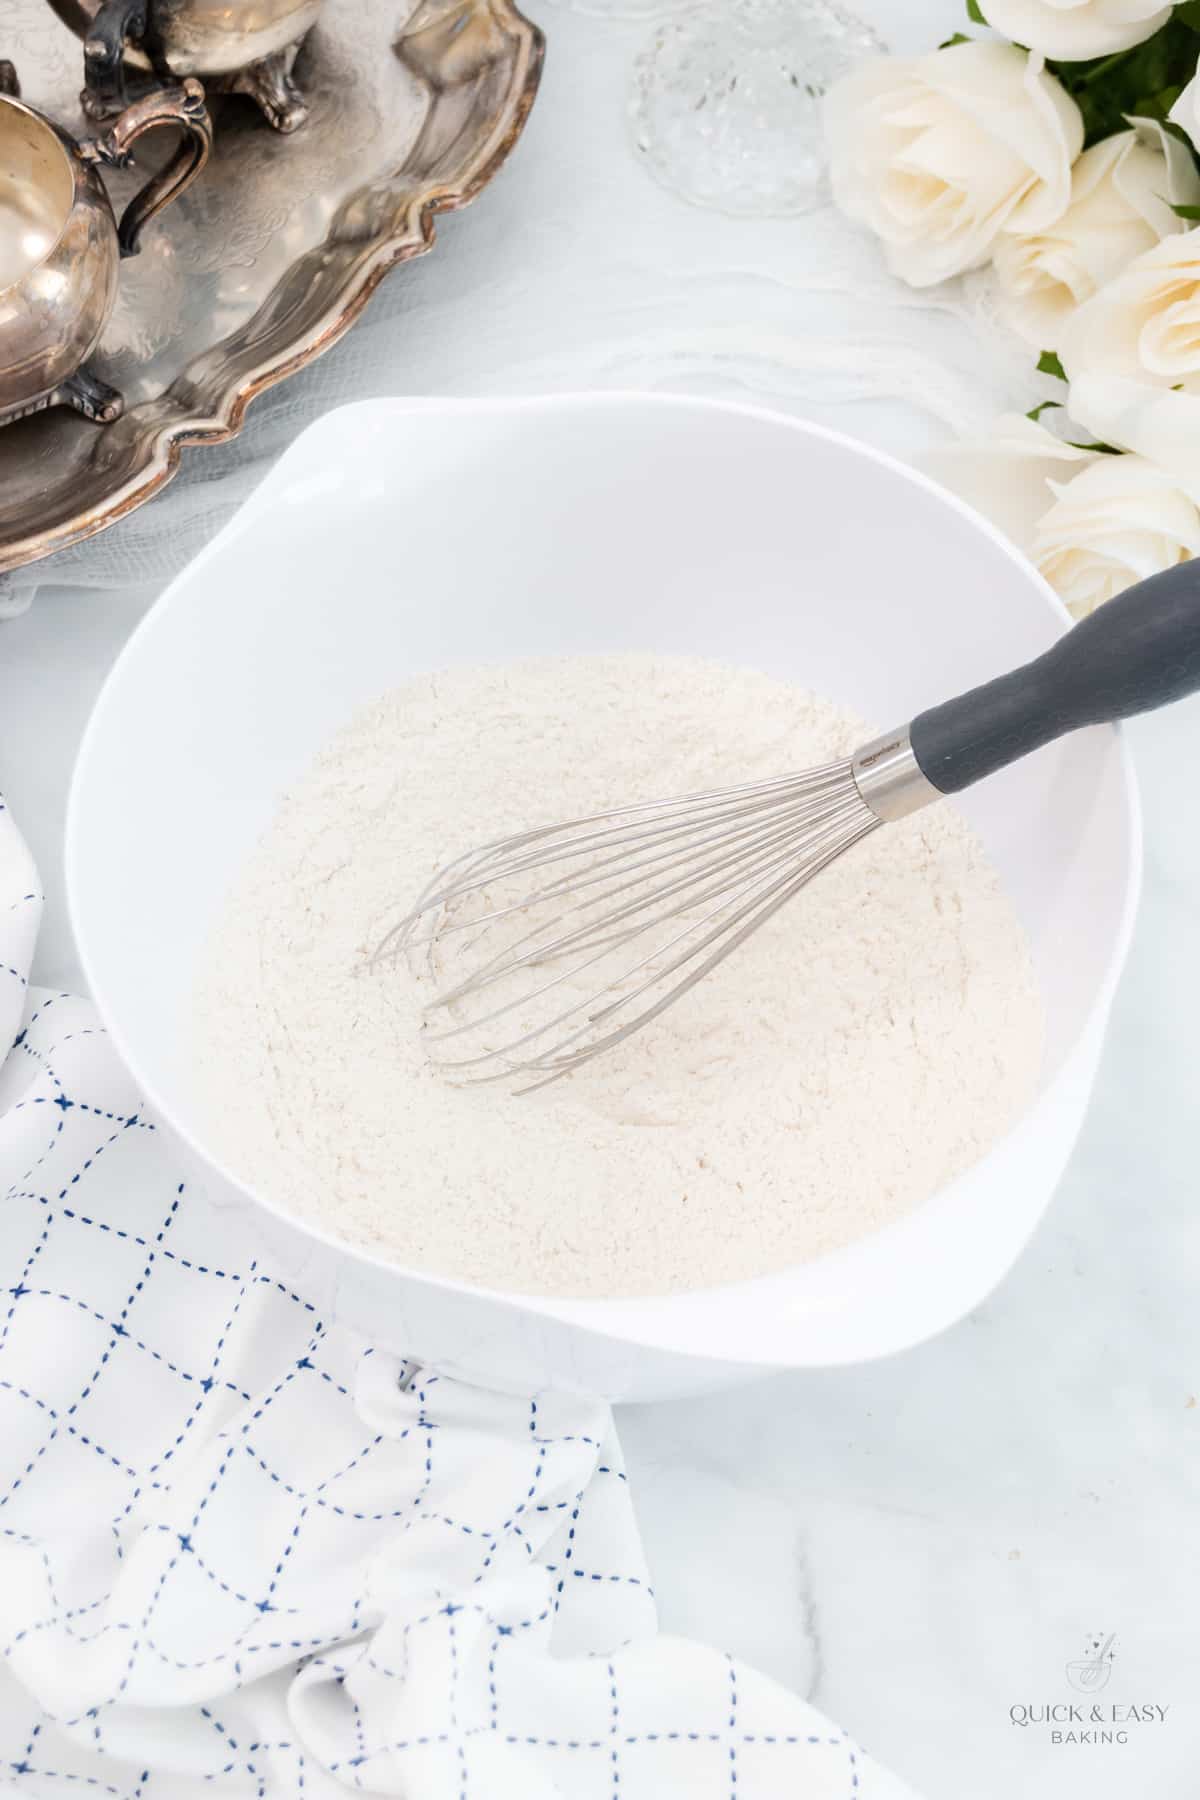 Dry ingredients in a white mixing bowl with a whisk.